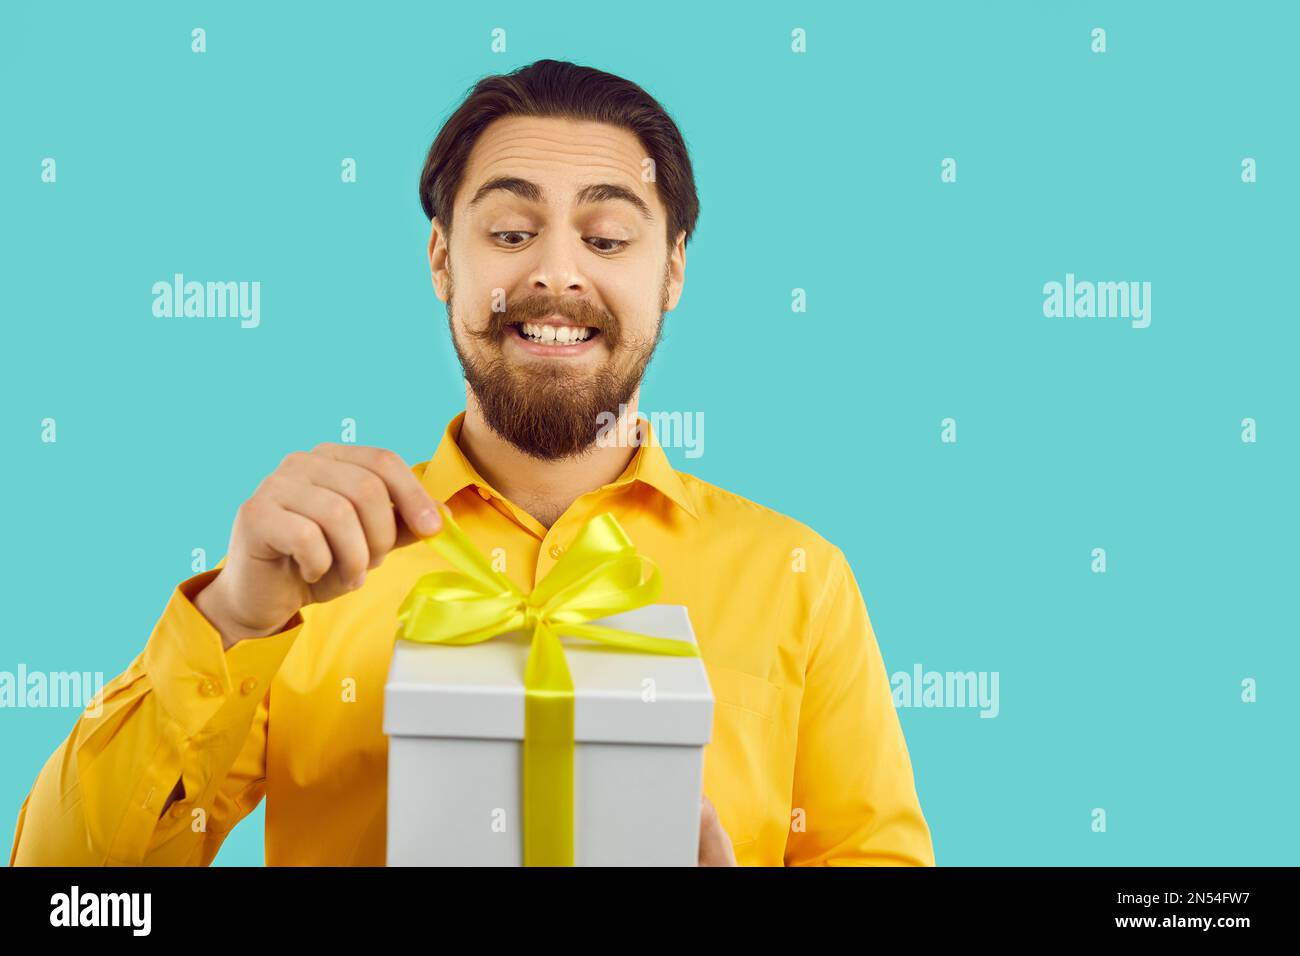 Funny man open gift box with present Stock Photo